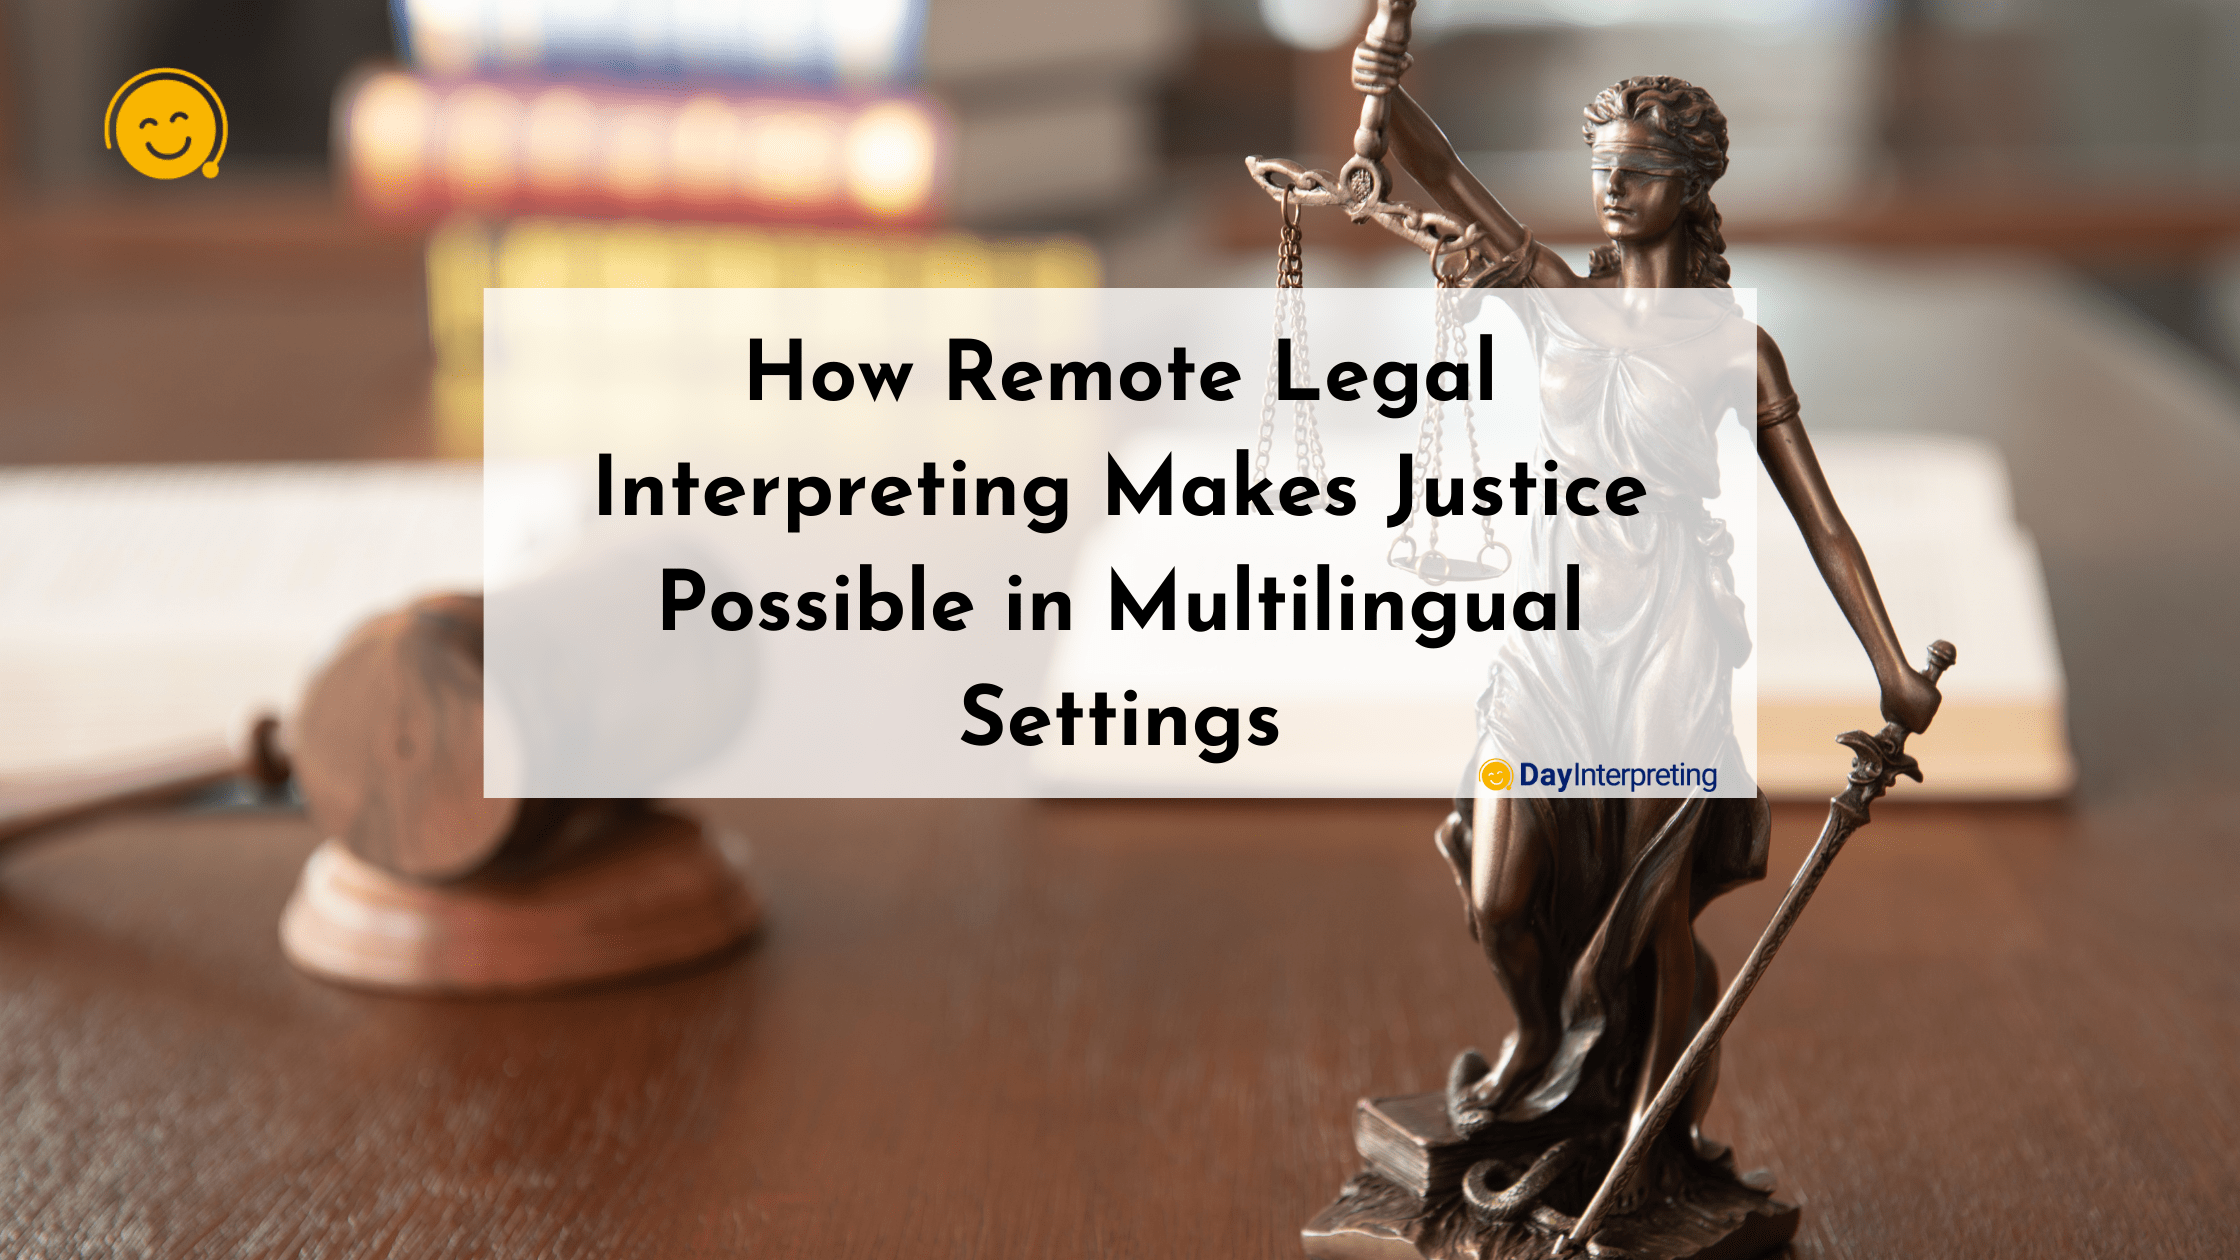 How Remote Legal Interpreting Makes Justice Possible in Multilingual Settings